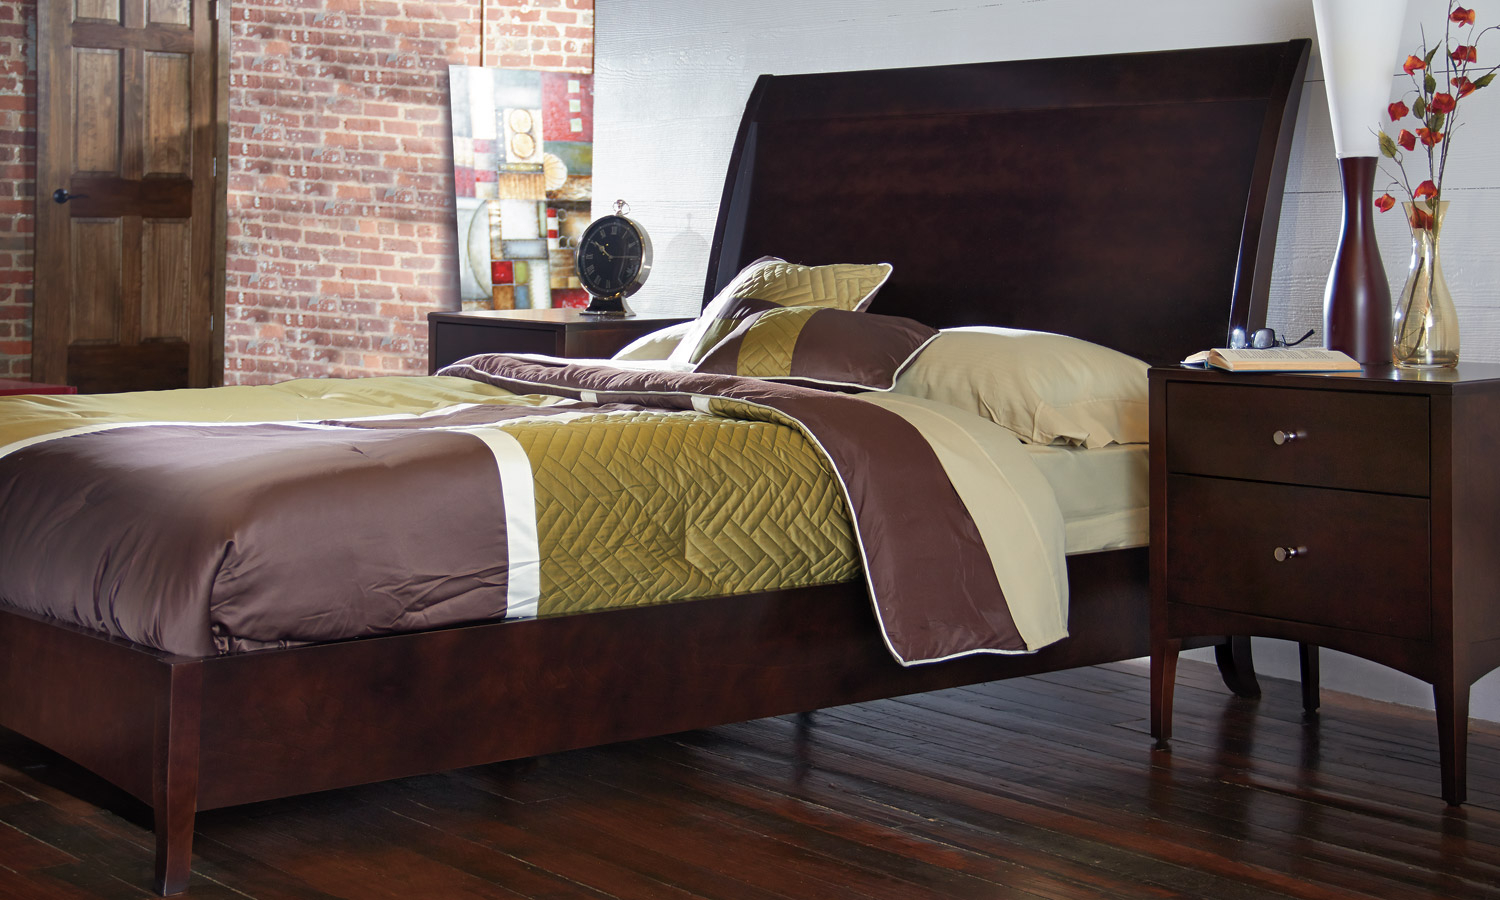 florence collection bedroom furniture